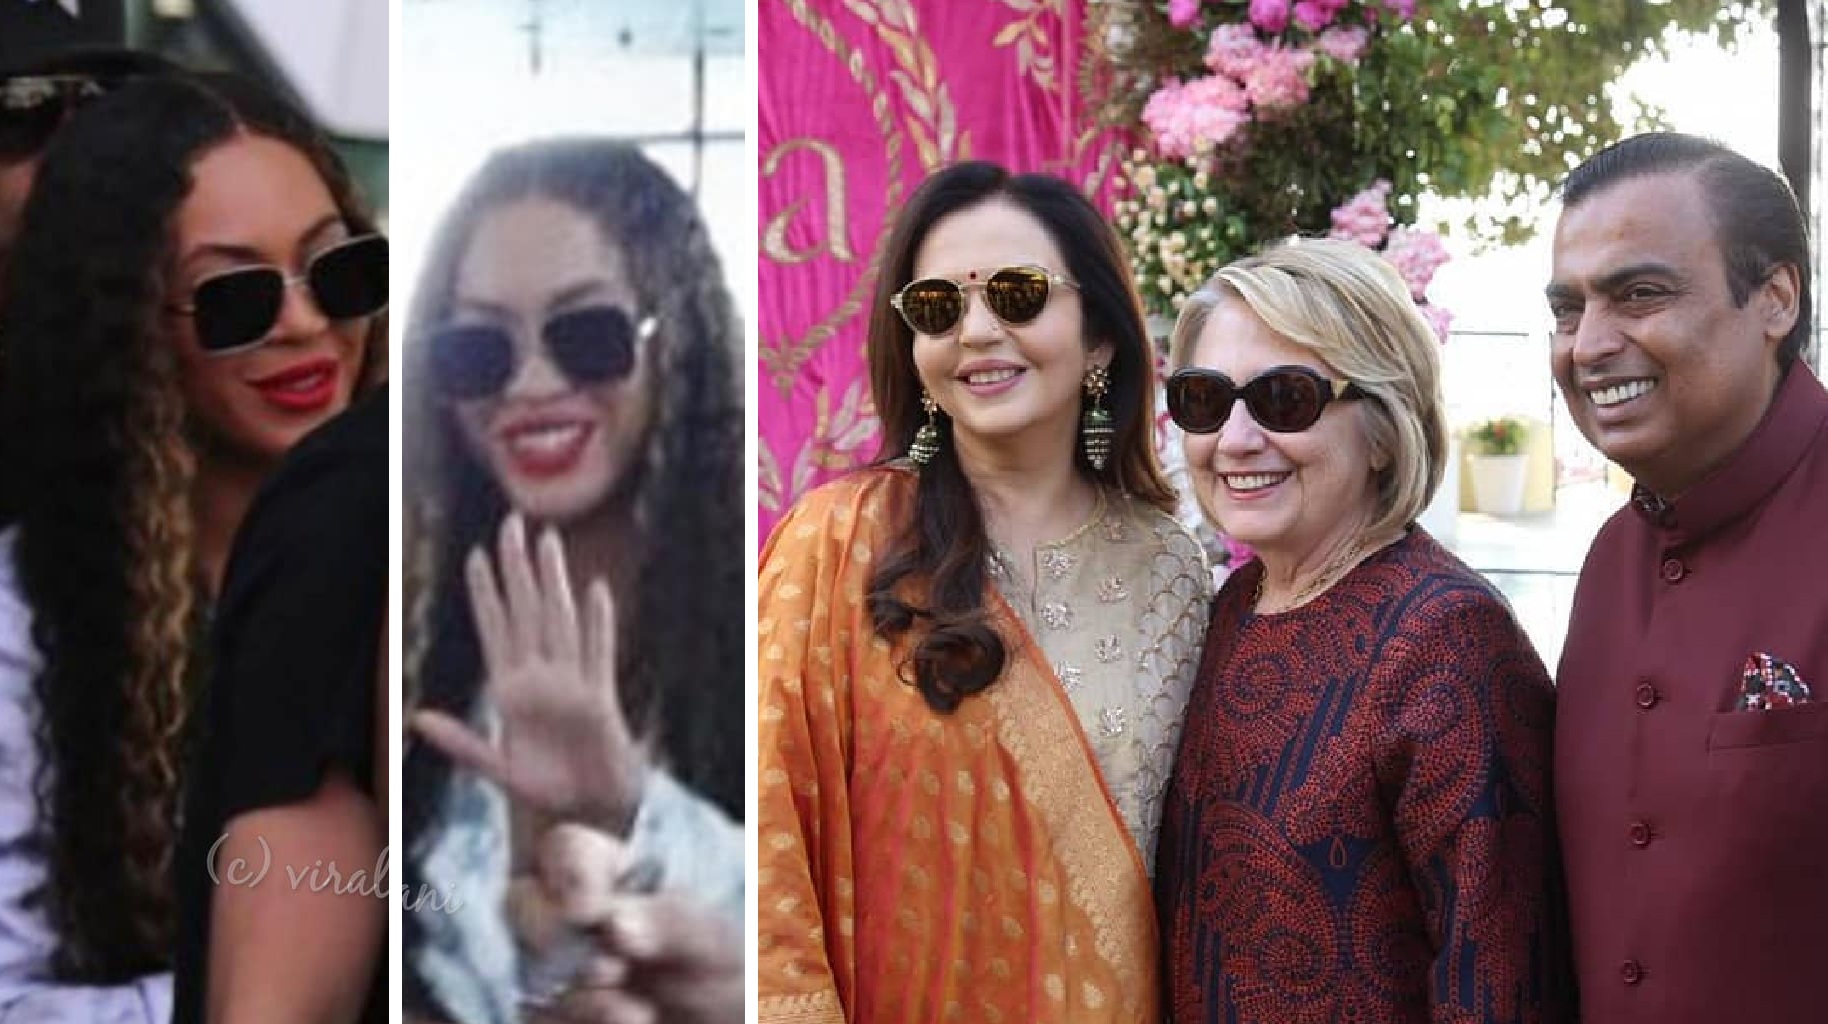 Beyonce and Hillary Clinton Land In India For Mukesh Ambani’s Daughter’s Wedding!